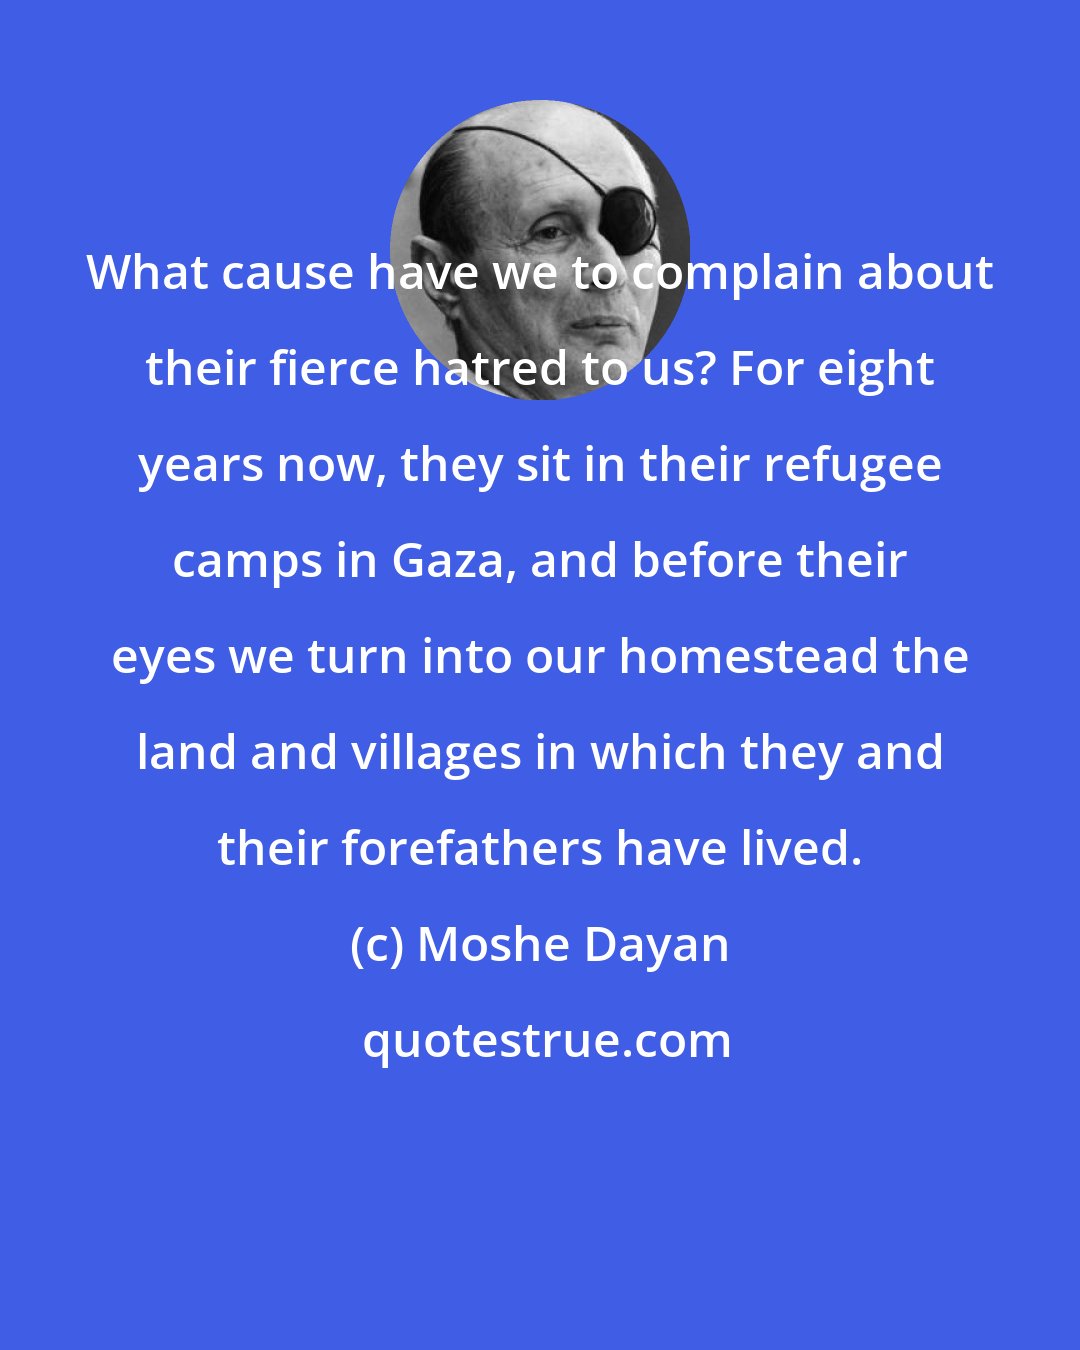 Moshe Dayan: What cause have we to complain about their fierce hatred to us? For eight years now, they sit in their refugee camps in Gaza, and before their eyes we turn into our homestead the land and villages in which they and their forefathers have lived.